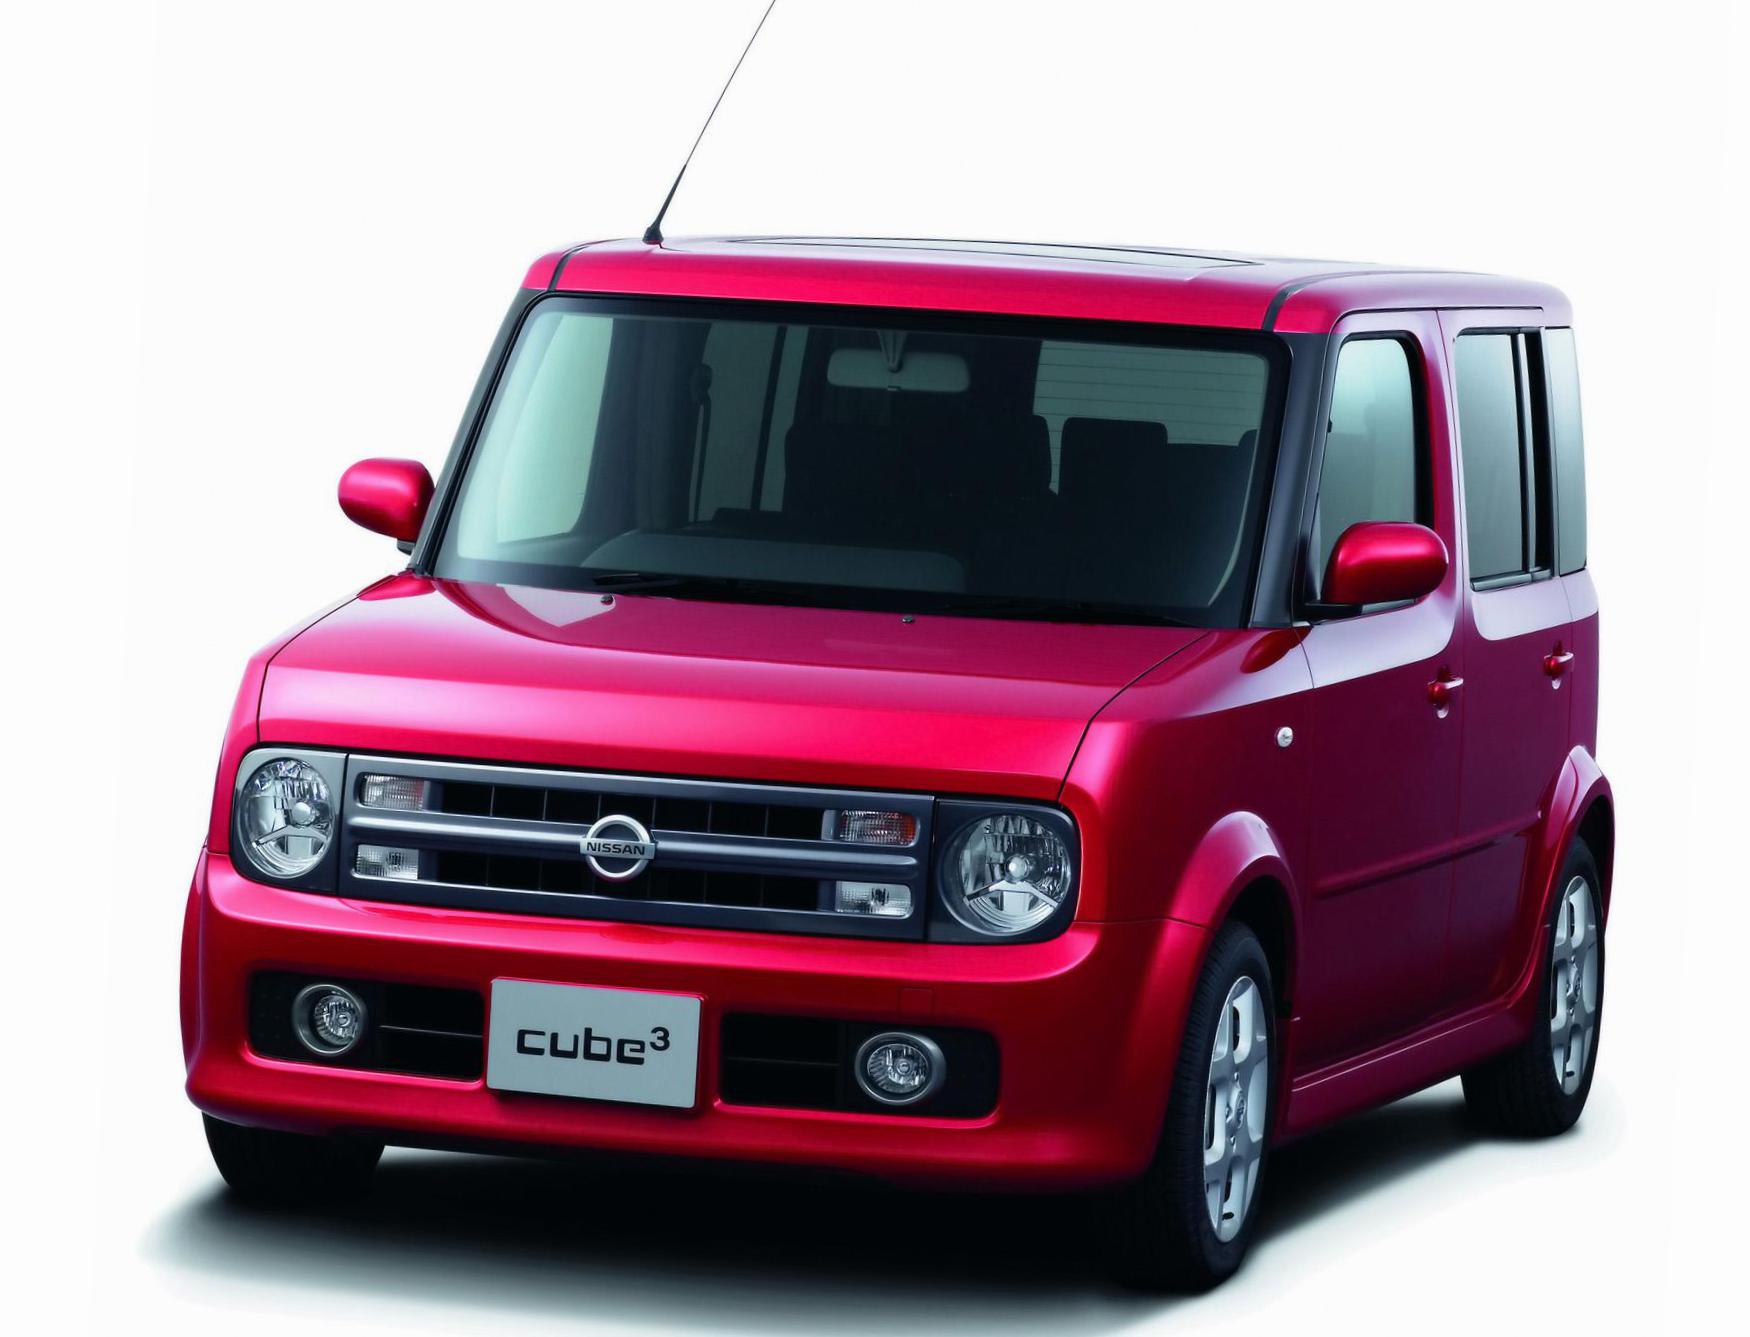 Nissan Cube Photos and Specs. Photo Nissan Cube new and 21 perfect